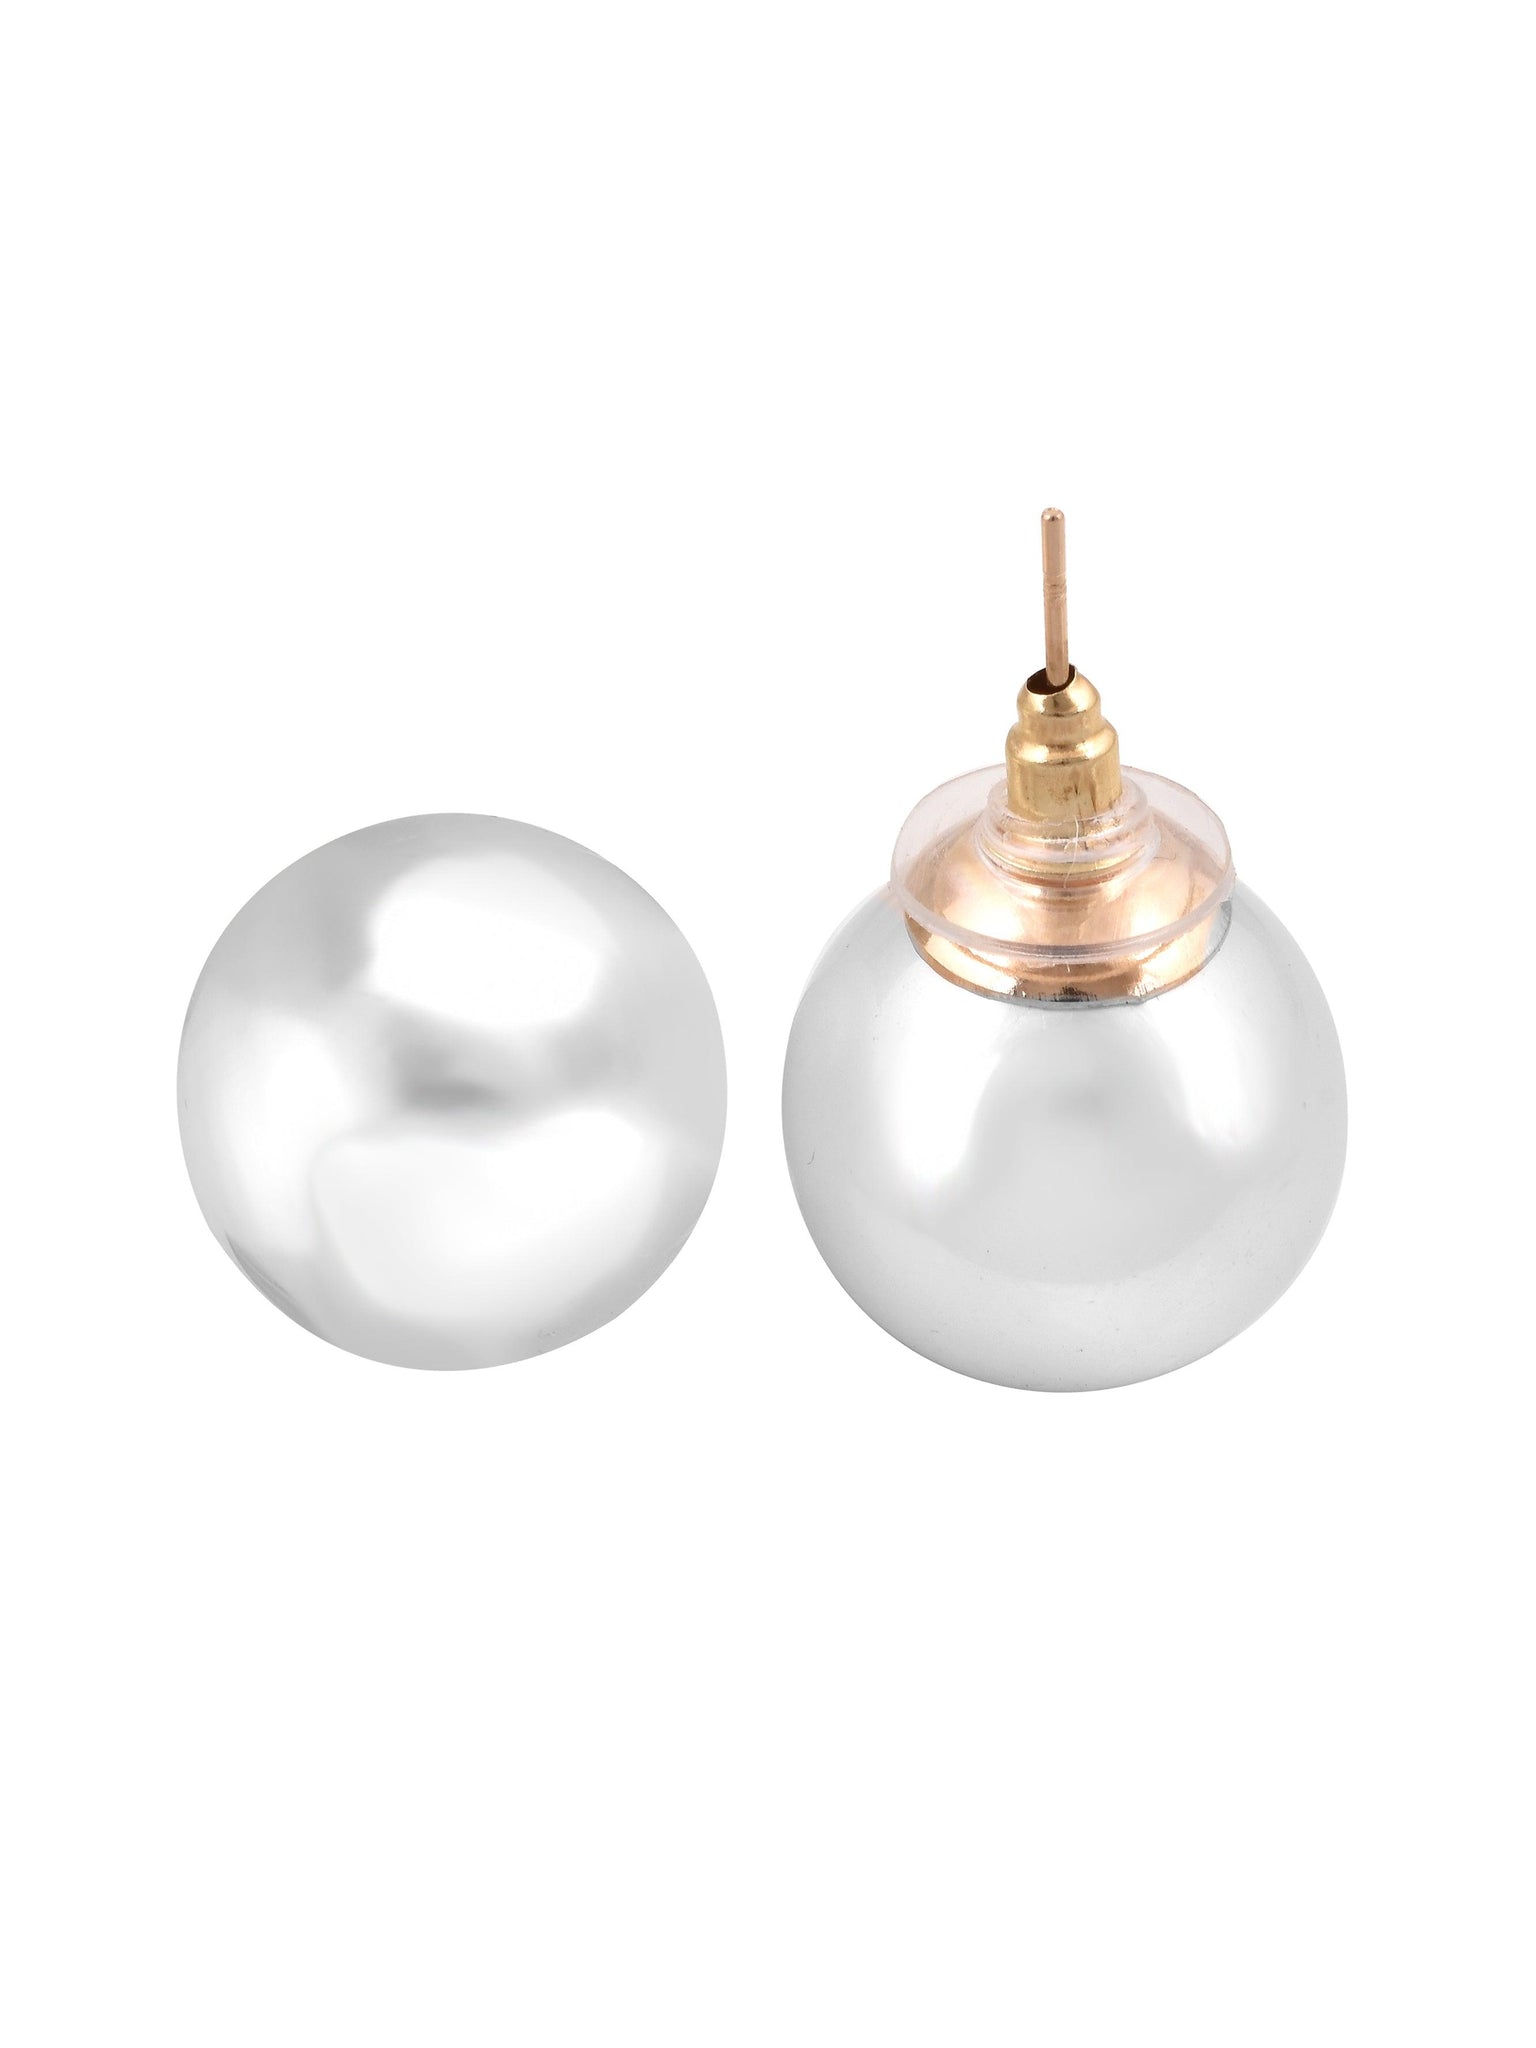 The Pearl Story - 15 mm Ivory White Shell Pearl Studs - Curio Cottage 